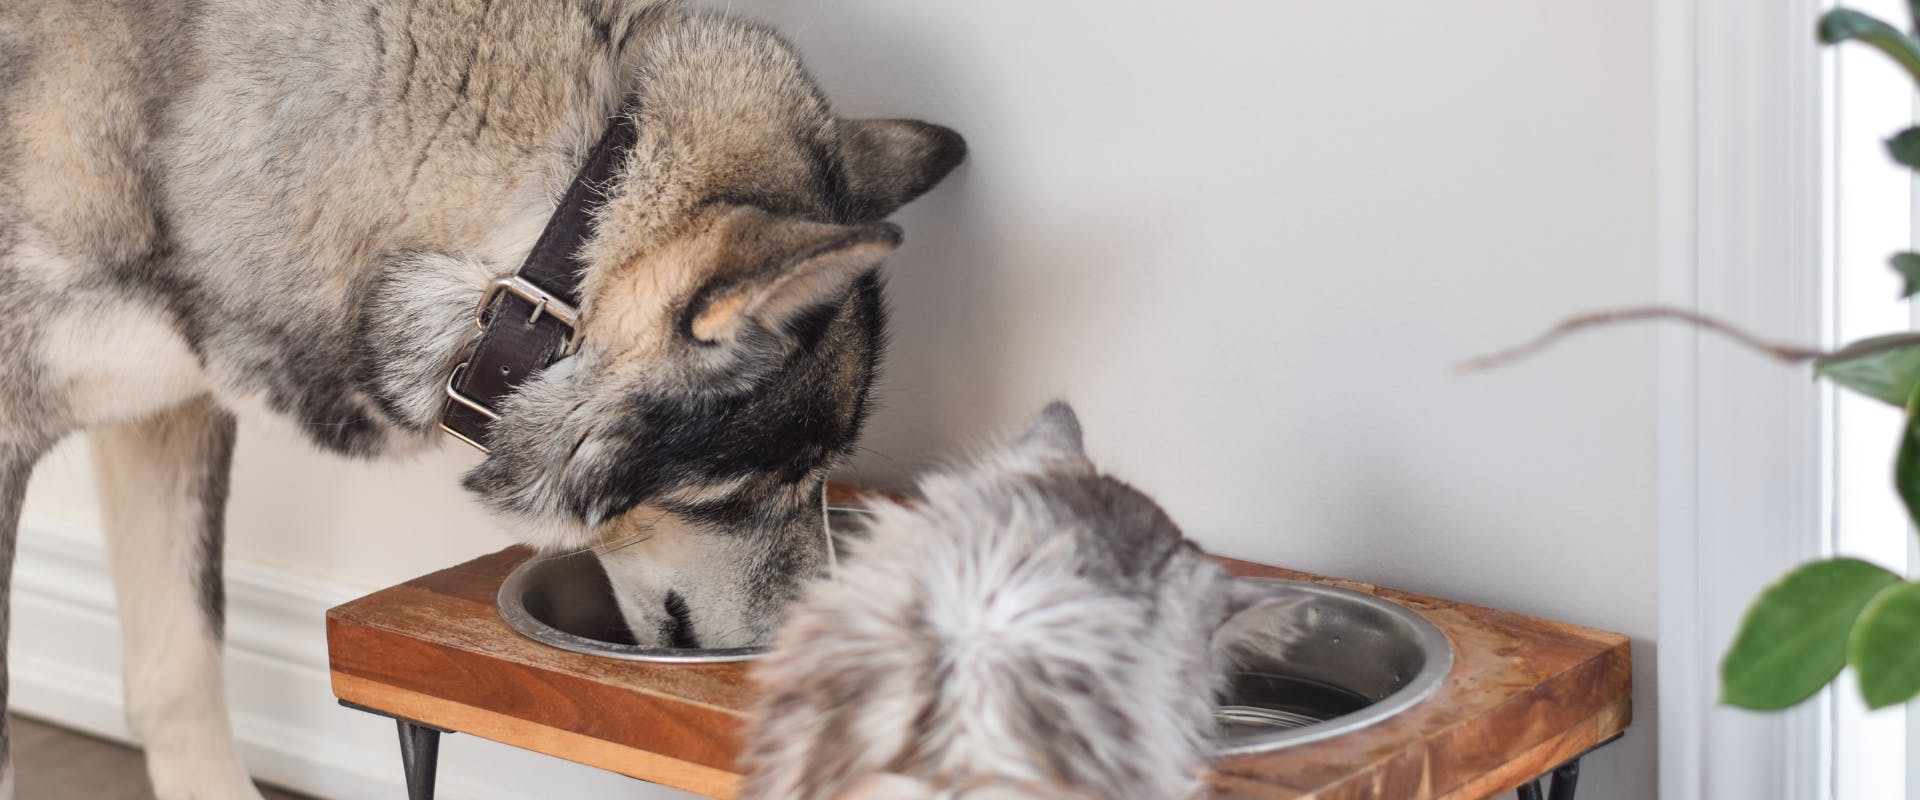 a husky and long-haired gray cat eating out of bowls in a joint wooden cat and dog food station